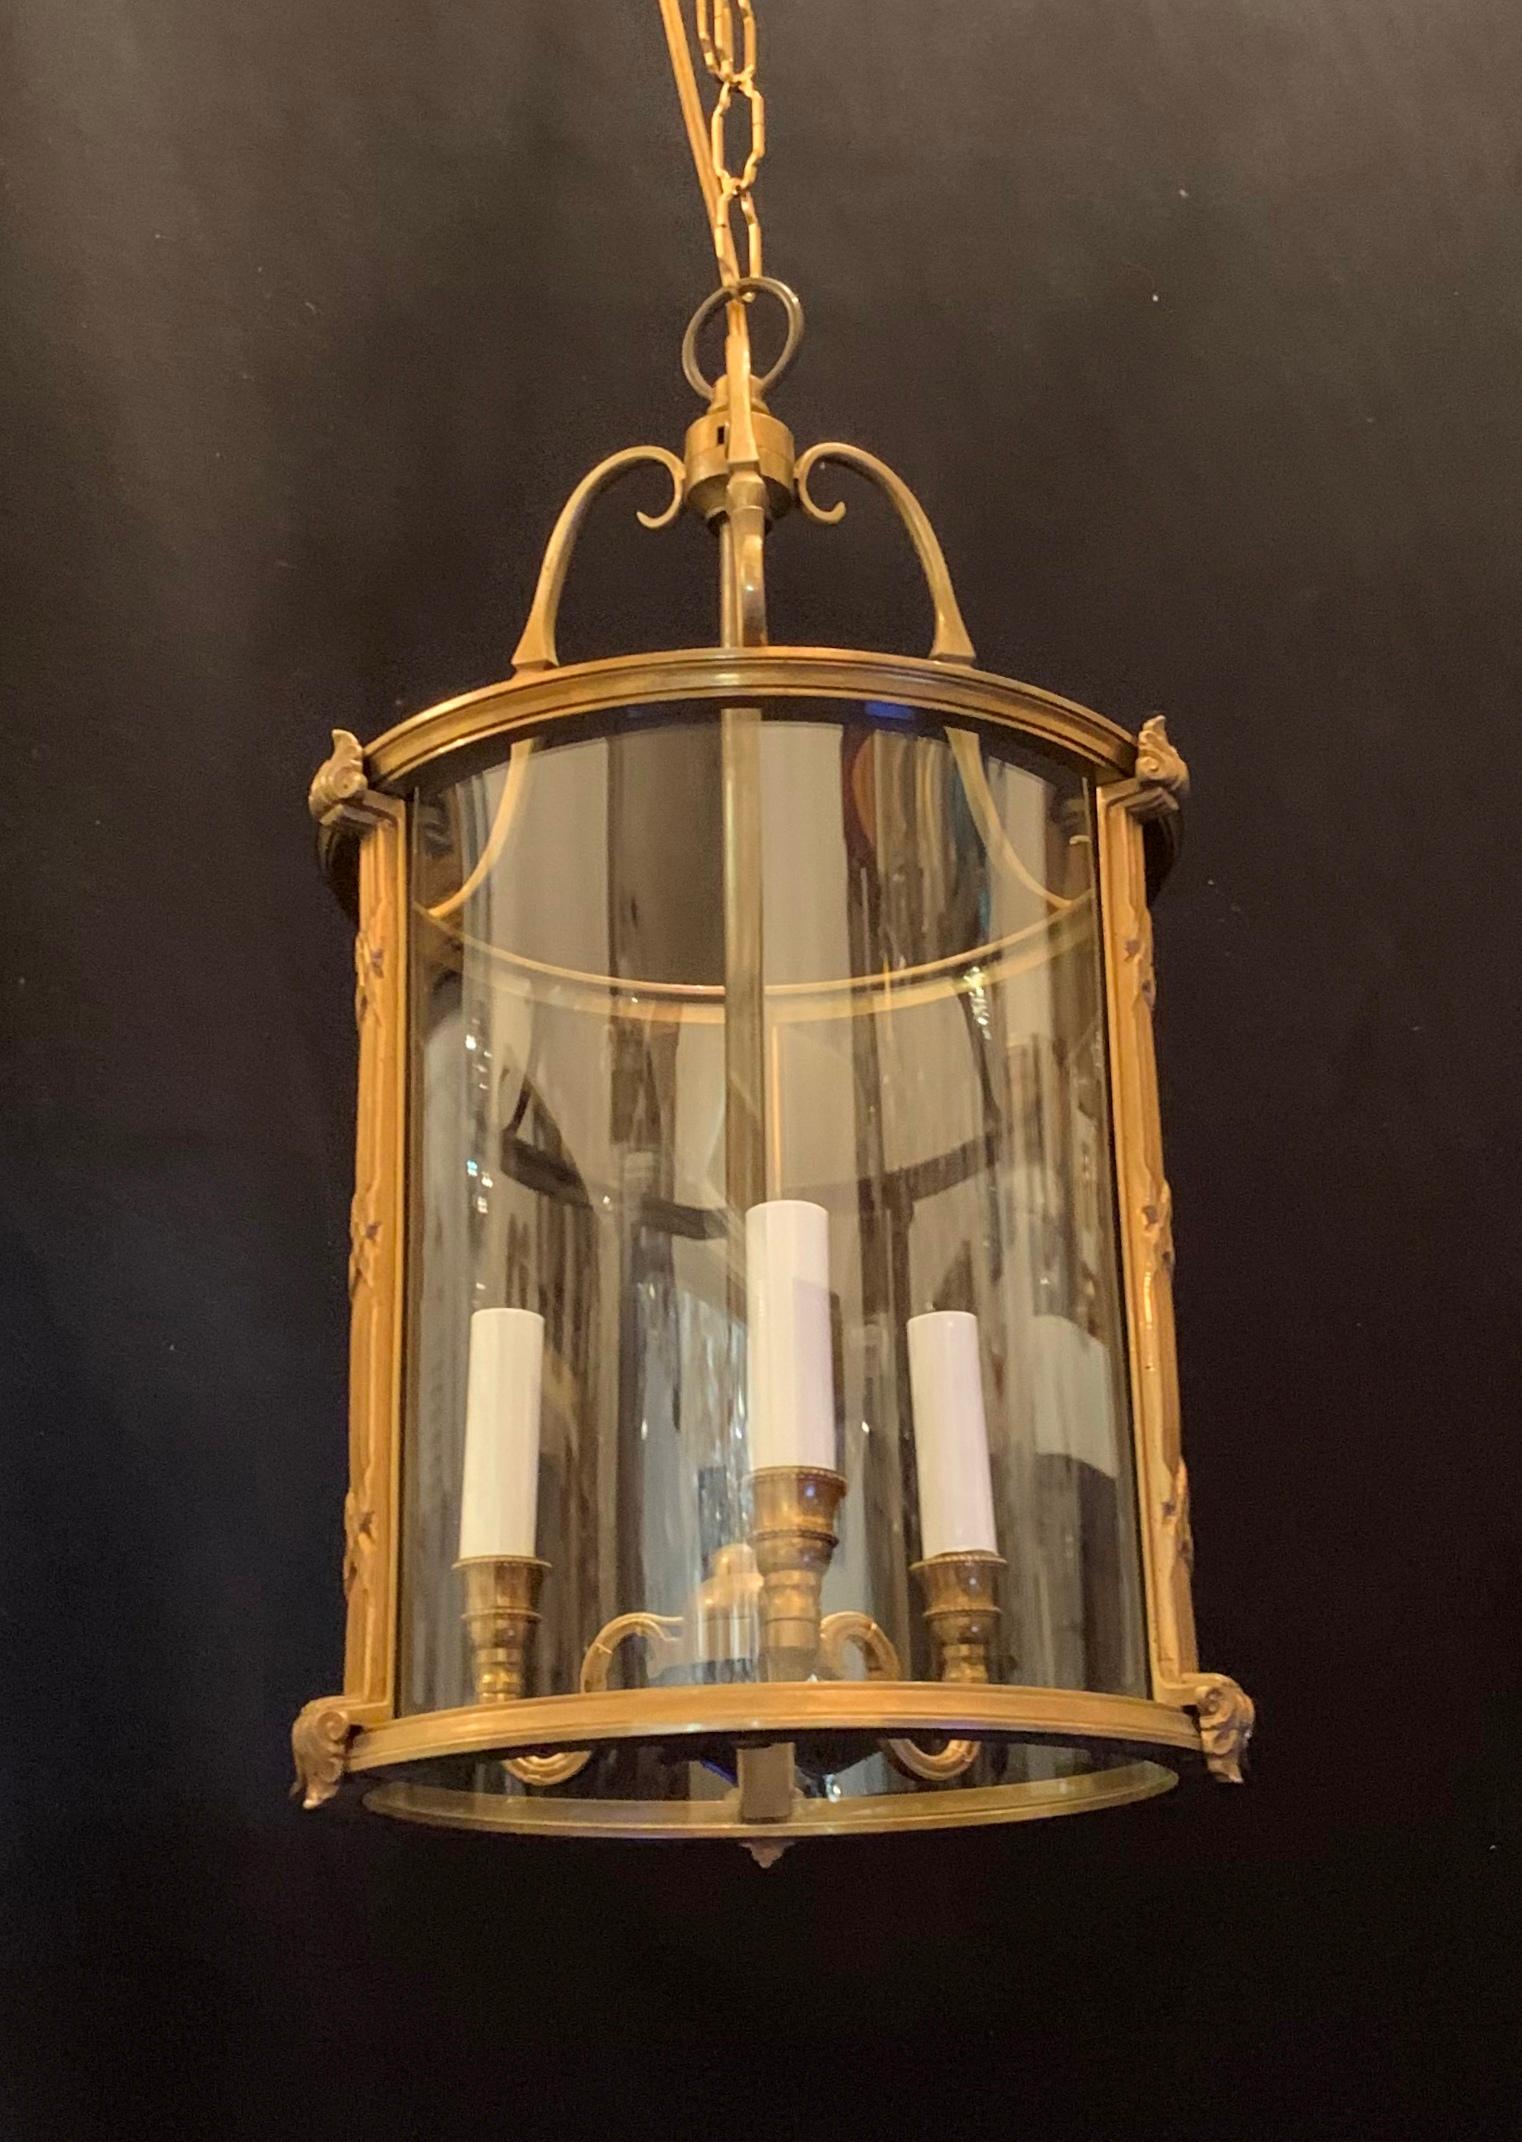 Perfect for a hallway or over a table or island. Classic gilt doré´ bronze and curved glass three candelabra light lantern. With beautiful scrolls curving at the top and supporting the lights, and beautiful etching around the bronze edges and